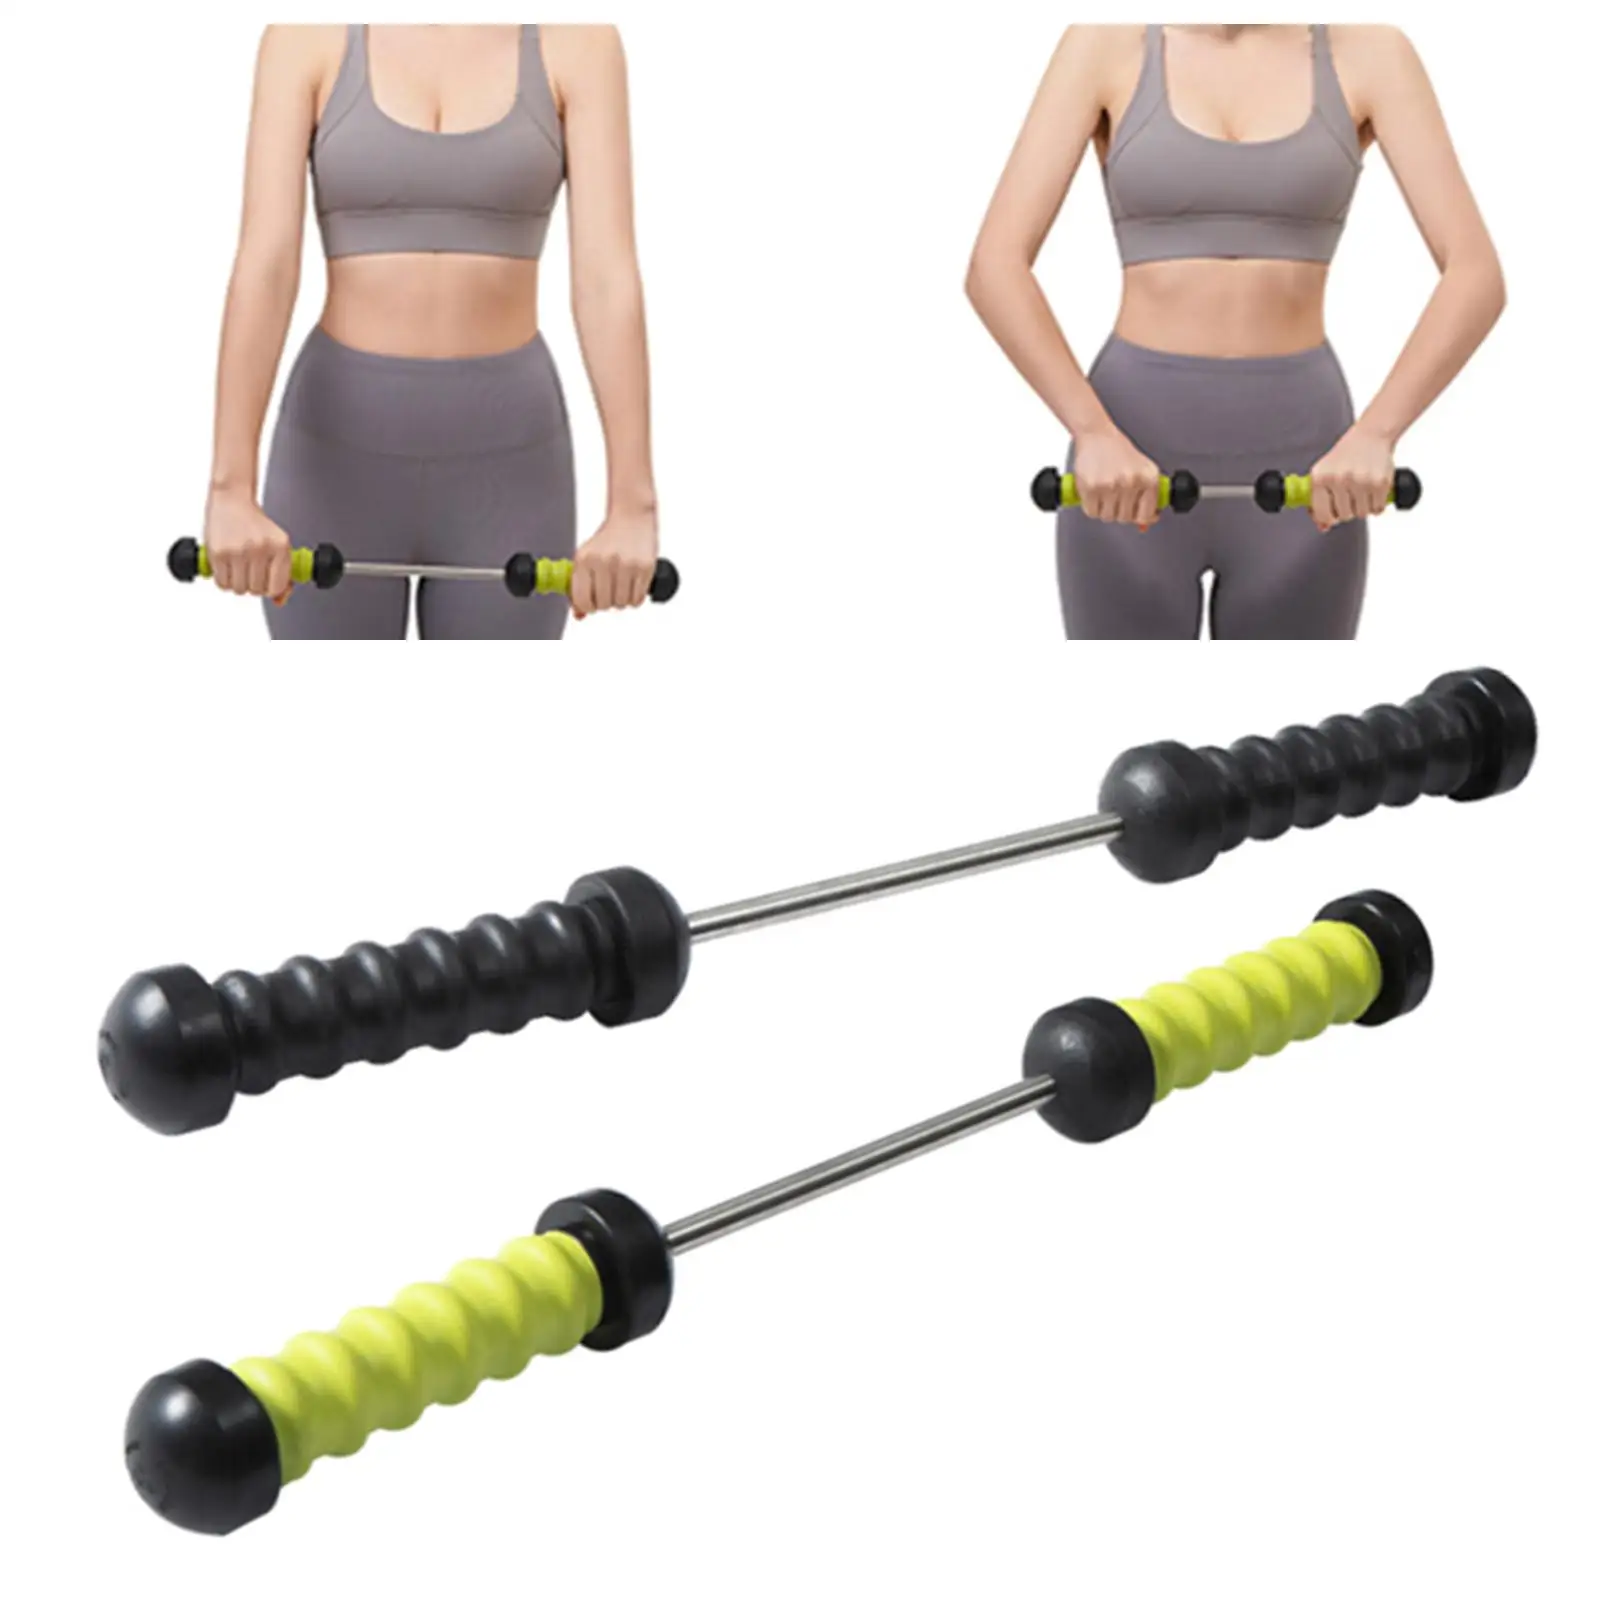 Arm Power Exerciser Pull Bar Heavy Duty Resistance Exercise System Bands for Muscle Builder Strengthener Adults